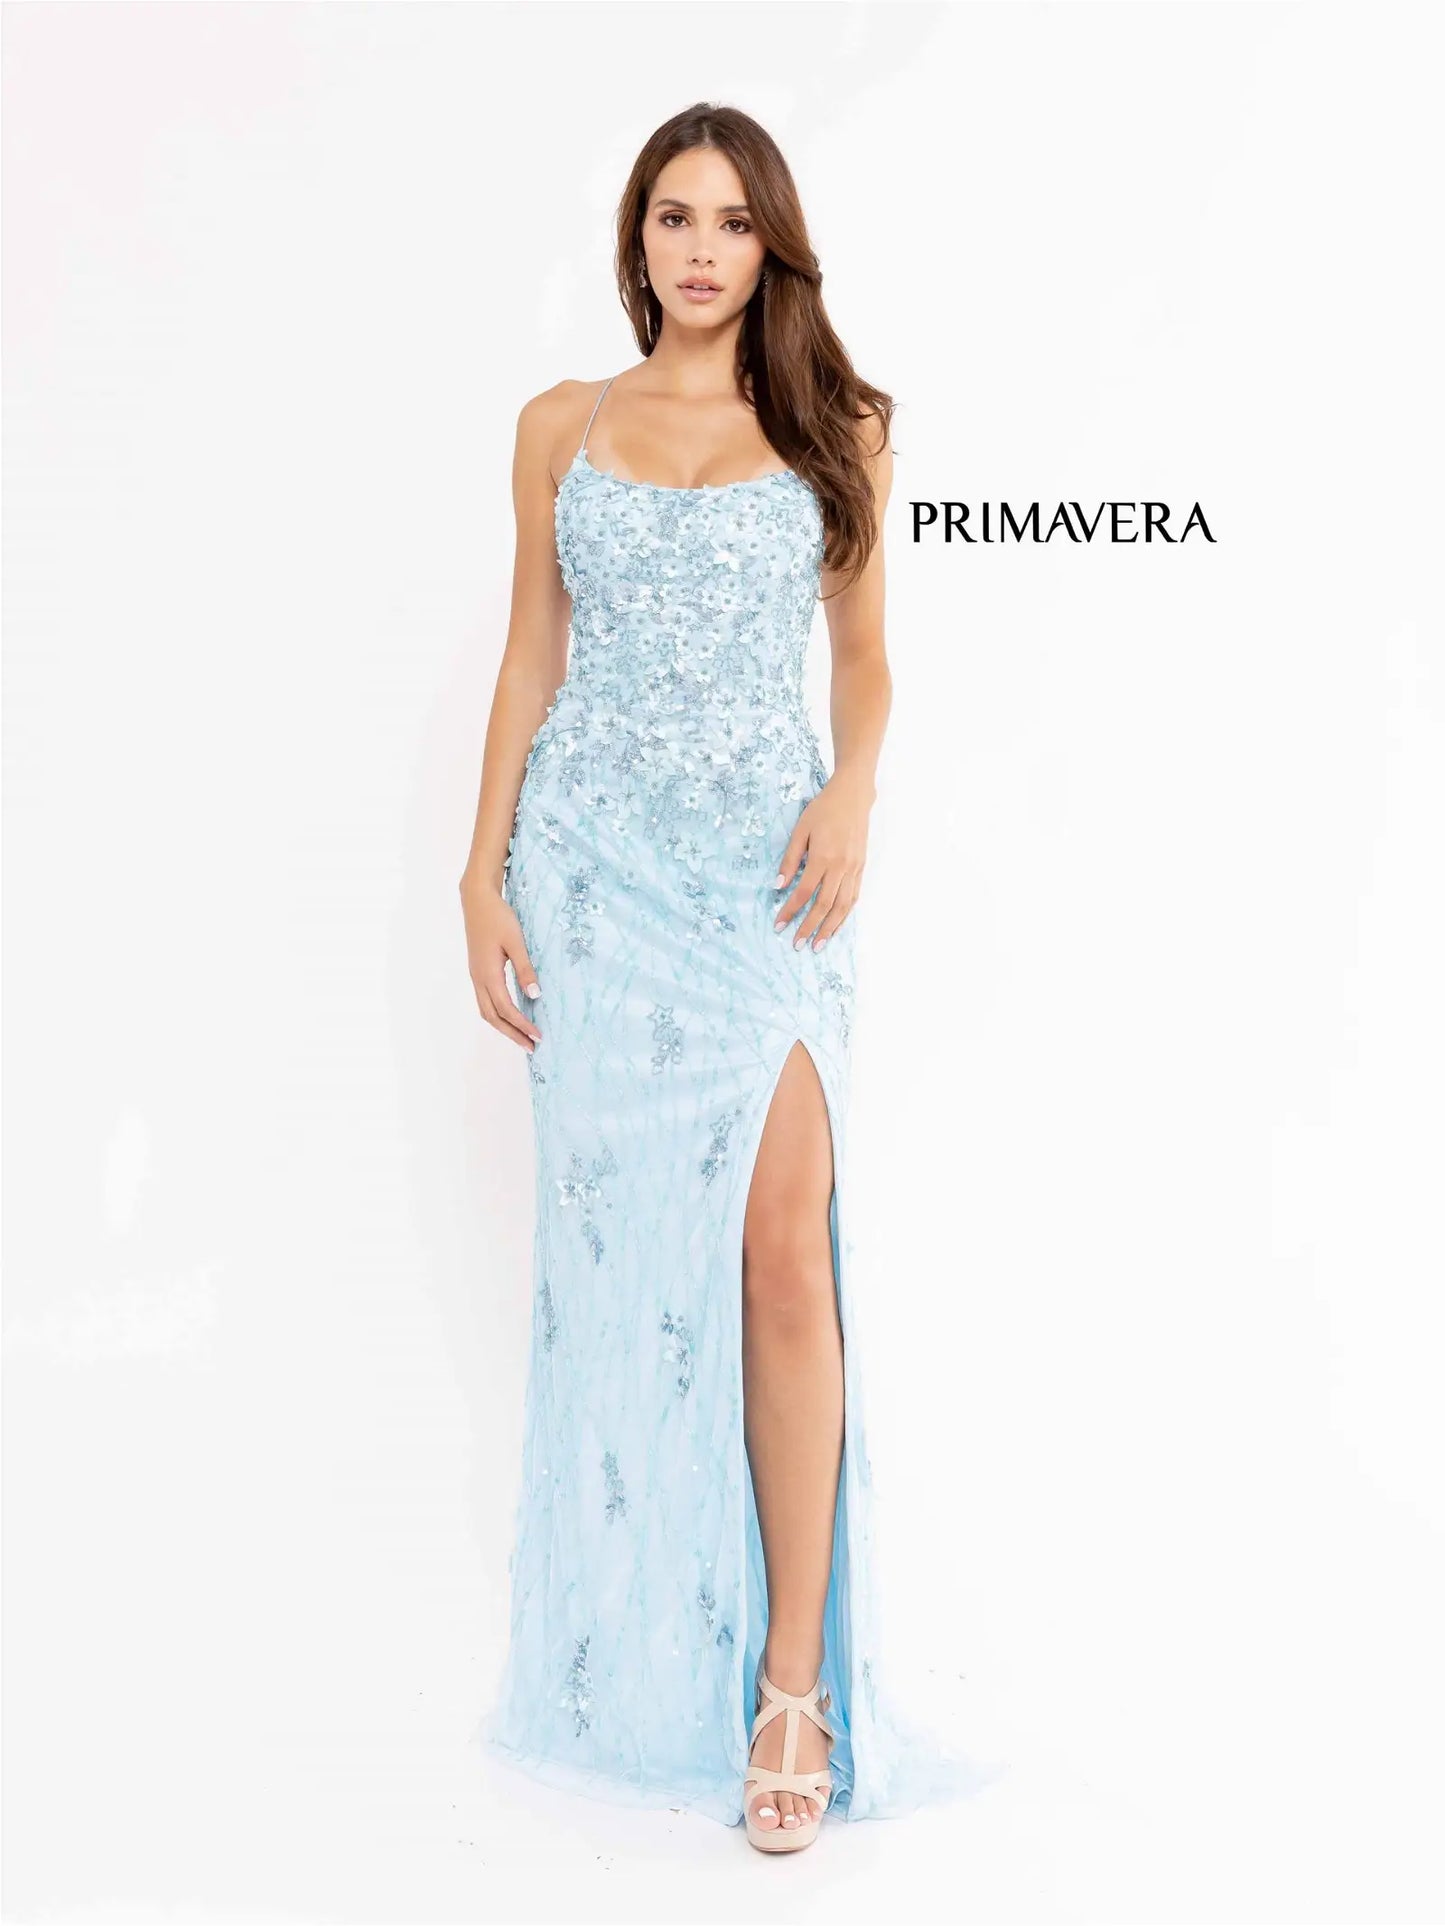 Primavera Couture 3917 Long Fitted Backless Beaded 3D Floral Sequin Corset Prom Dress Slit  Sizes: 000-24  Colors: Powder Blue, Red, Purple